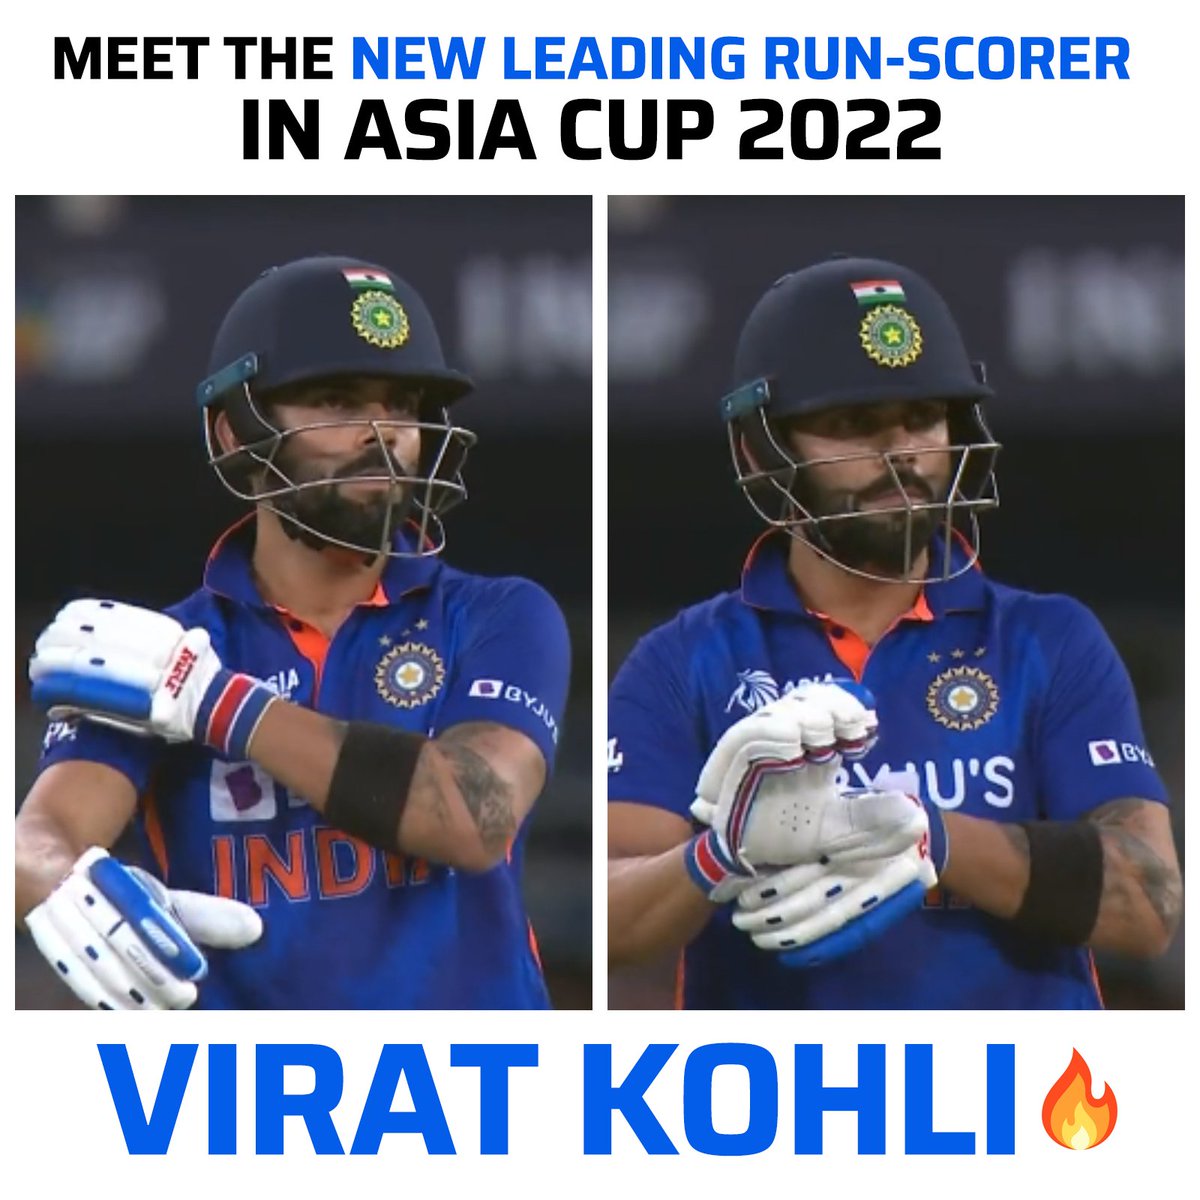 He is back 🔥🔥🔥🔥🔥🔥the king is back for his 👑 end the debate 🔥#nevereverdoutourking👑#viratian#king#backtoback50 #AsiaCup2022 #INDvsPAK2022